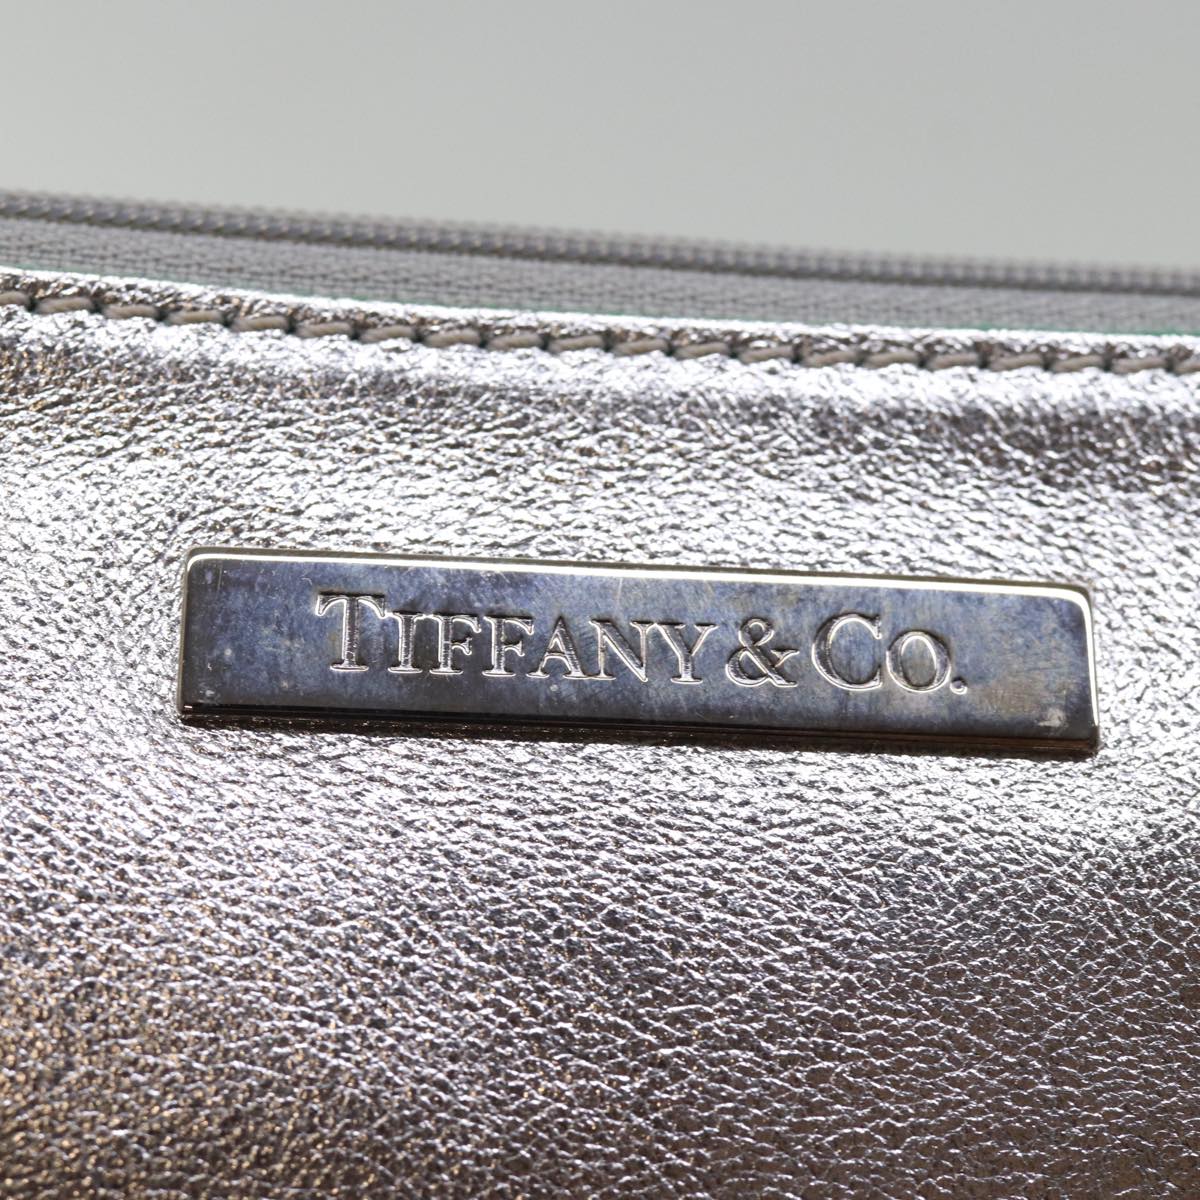 TIFFANY&Co. Hand Bag Suede Light Blue Auth 75135